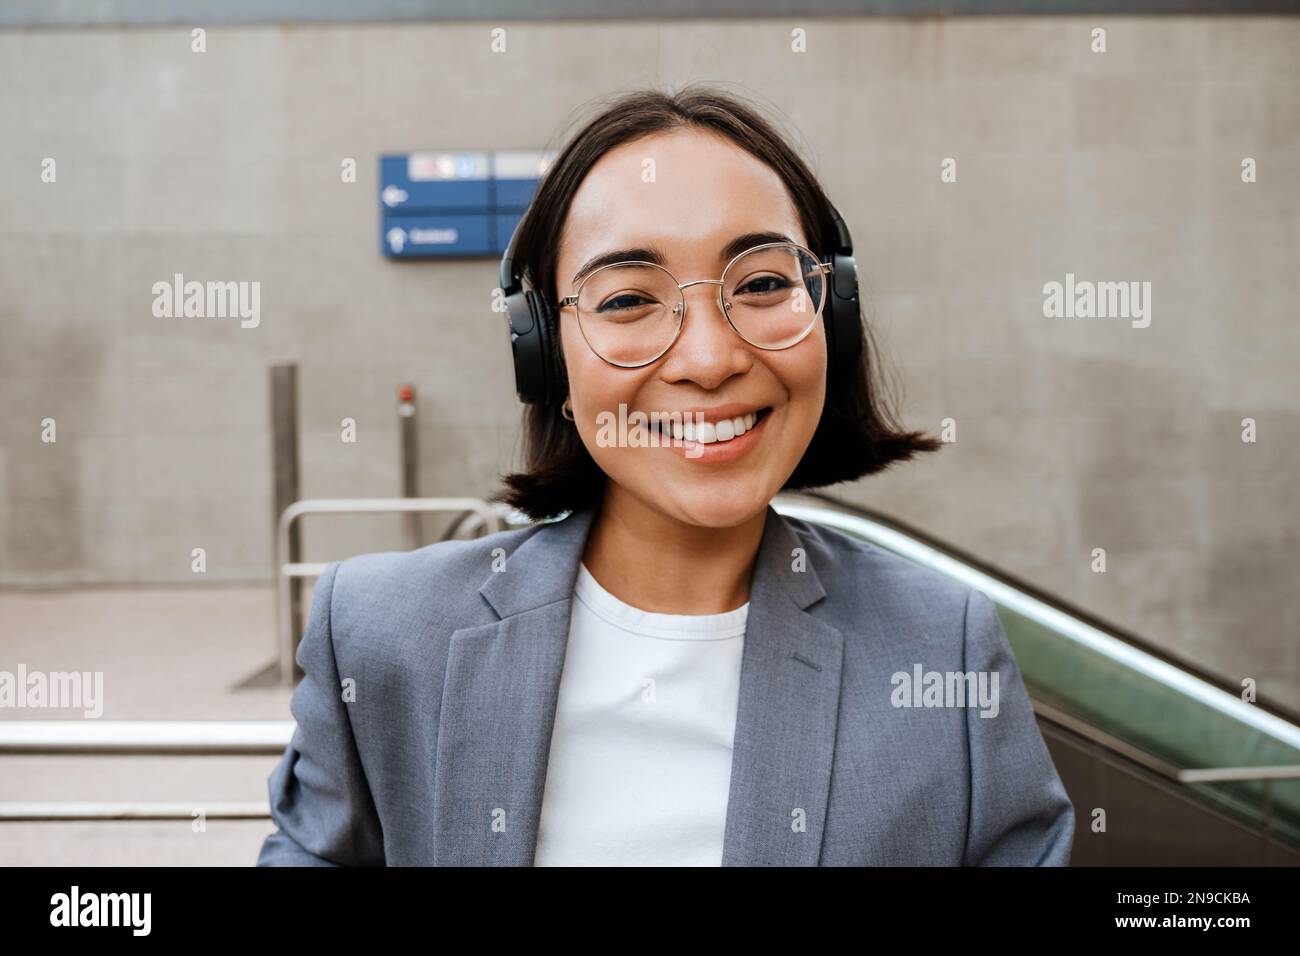 Young asian woman in headphones smiling and looking at camera while standing outdoors near the escalator Stock Photo